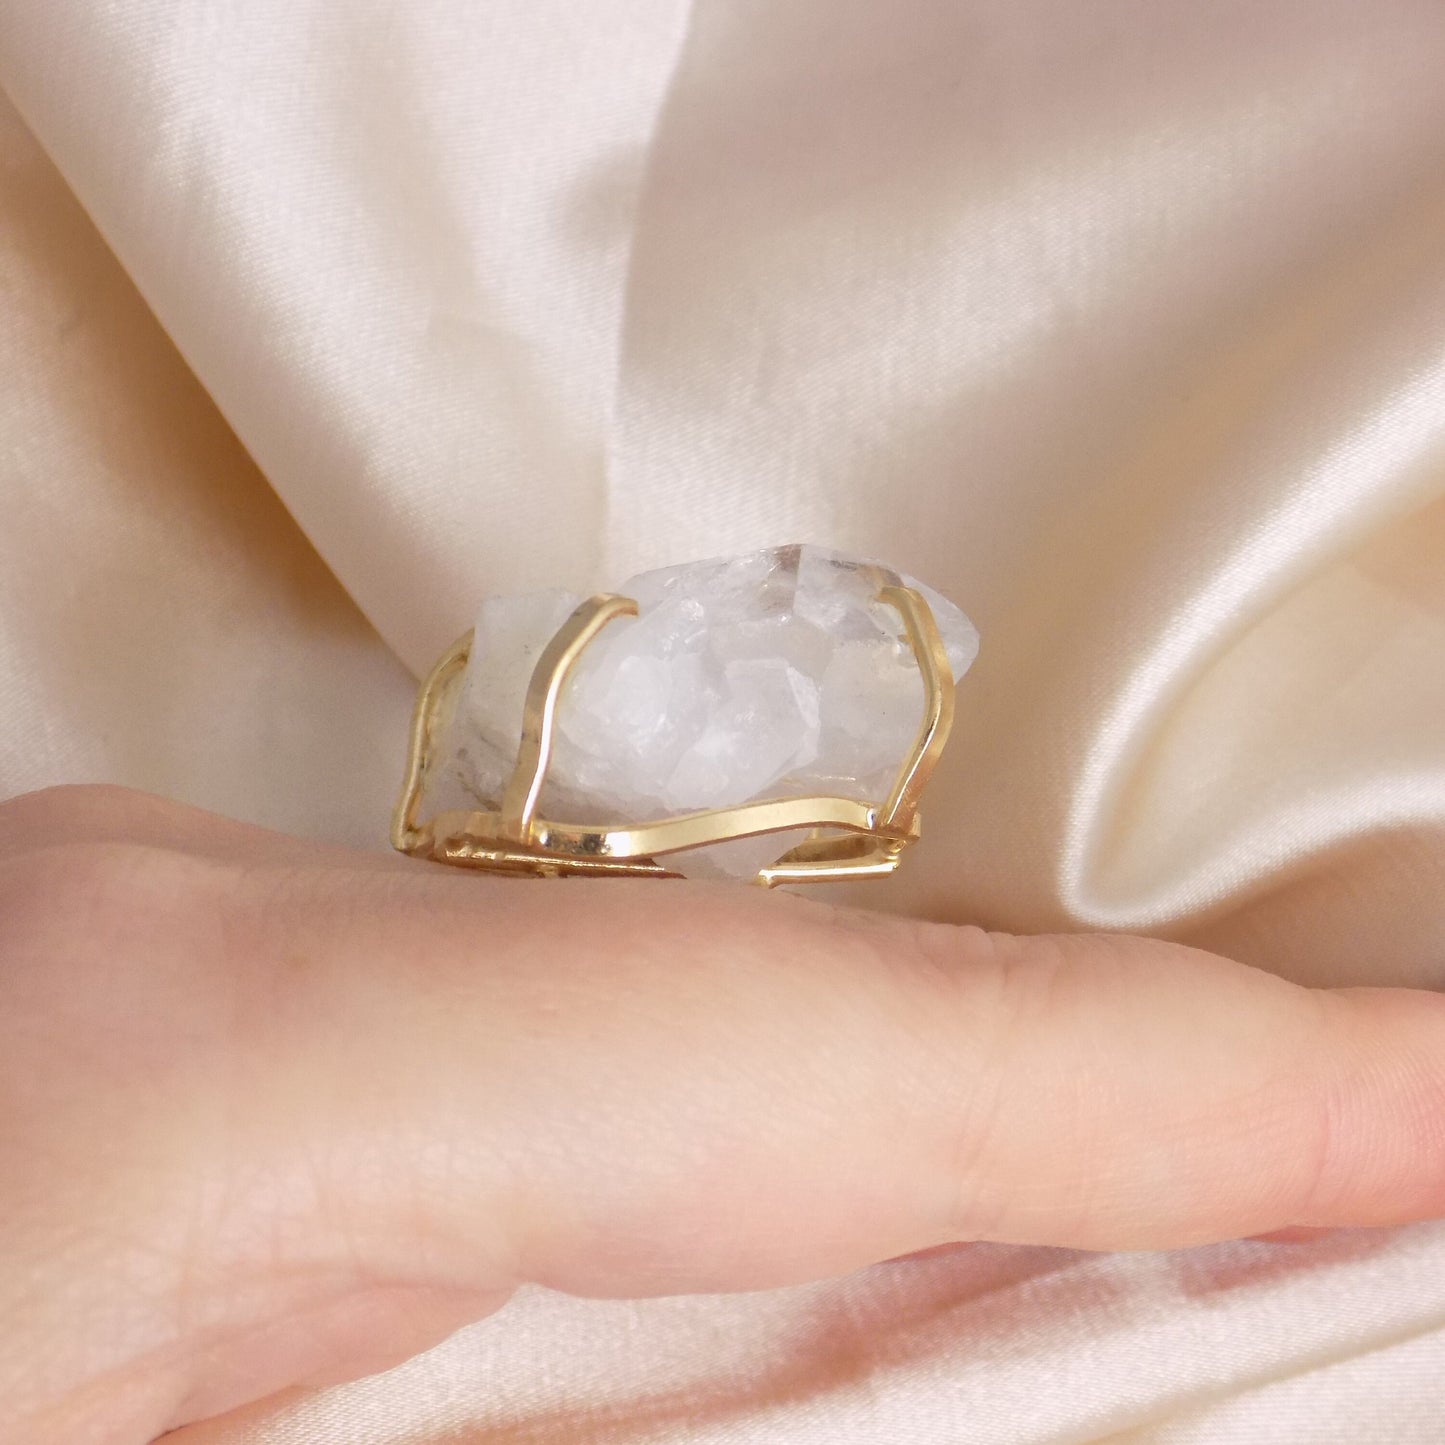 Large Raw Clear Crystal Quartz Ring For Women - Christmas Gifts For Her